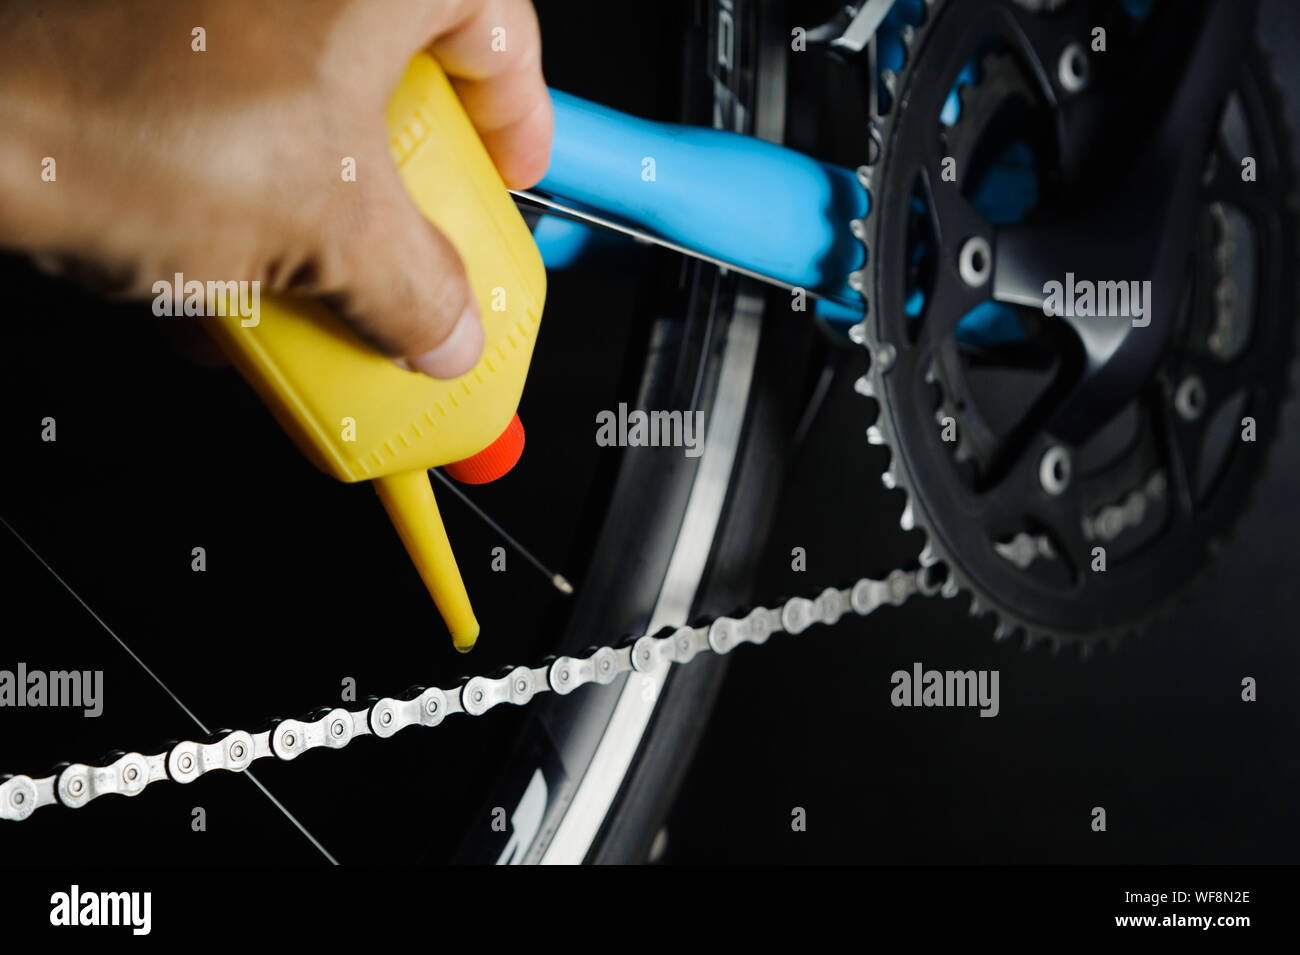 Mechanic oiling bicycle chain and gear with oil. Studio shot Stock Photo